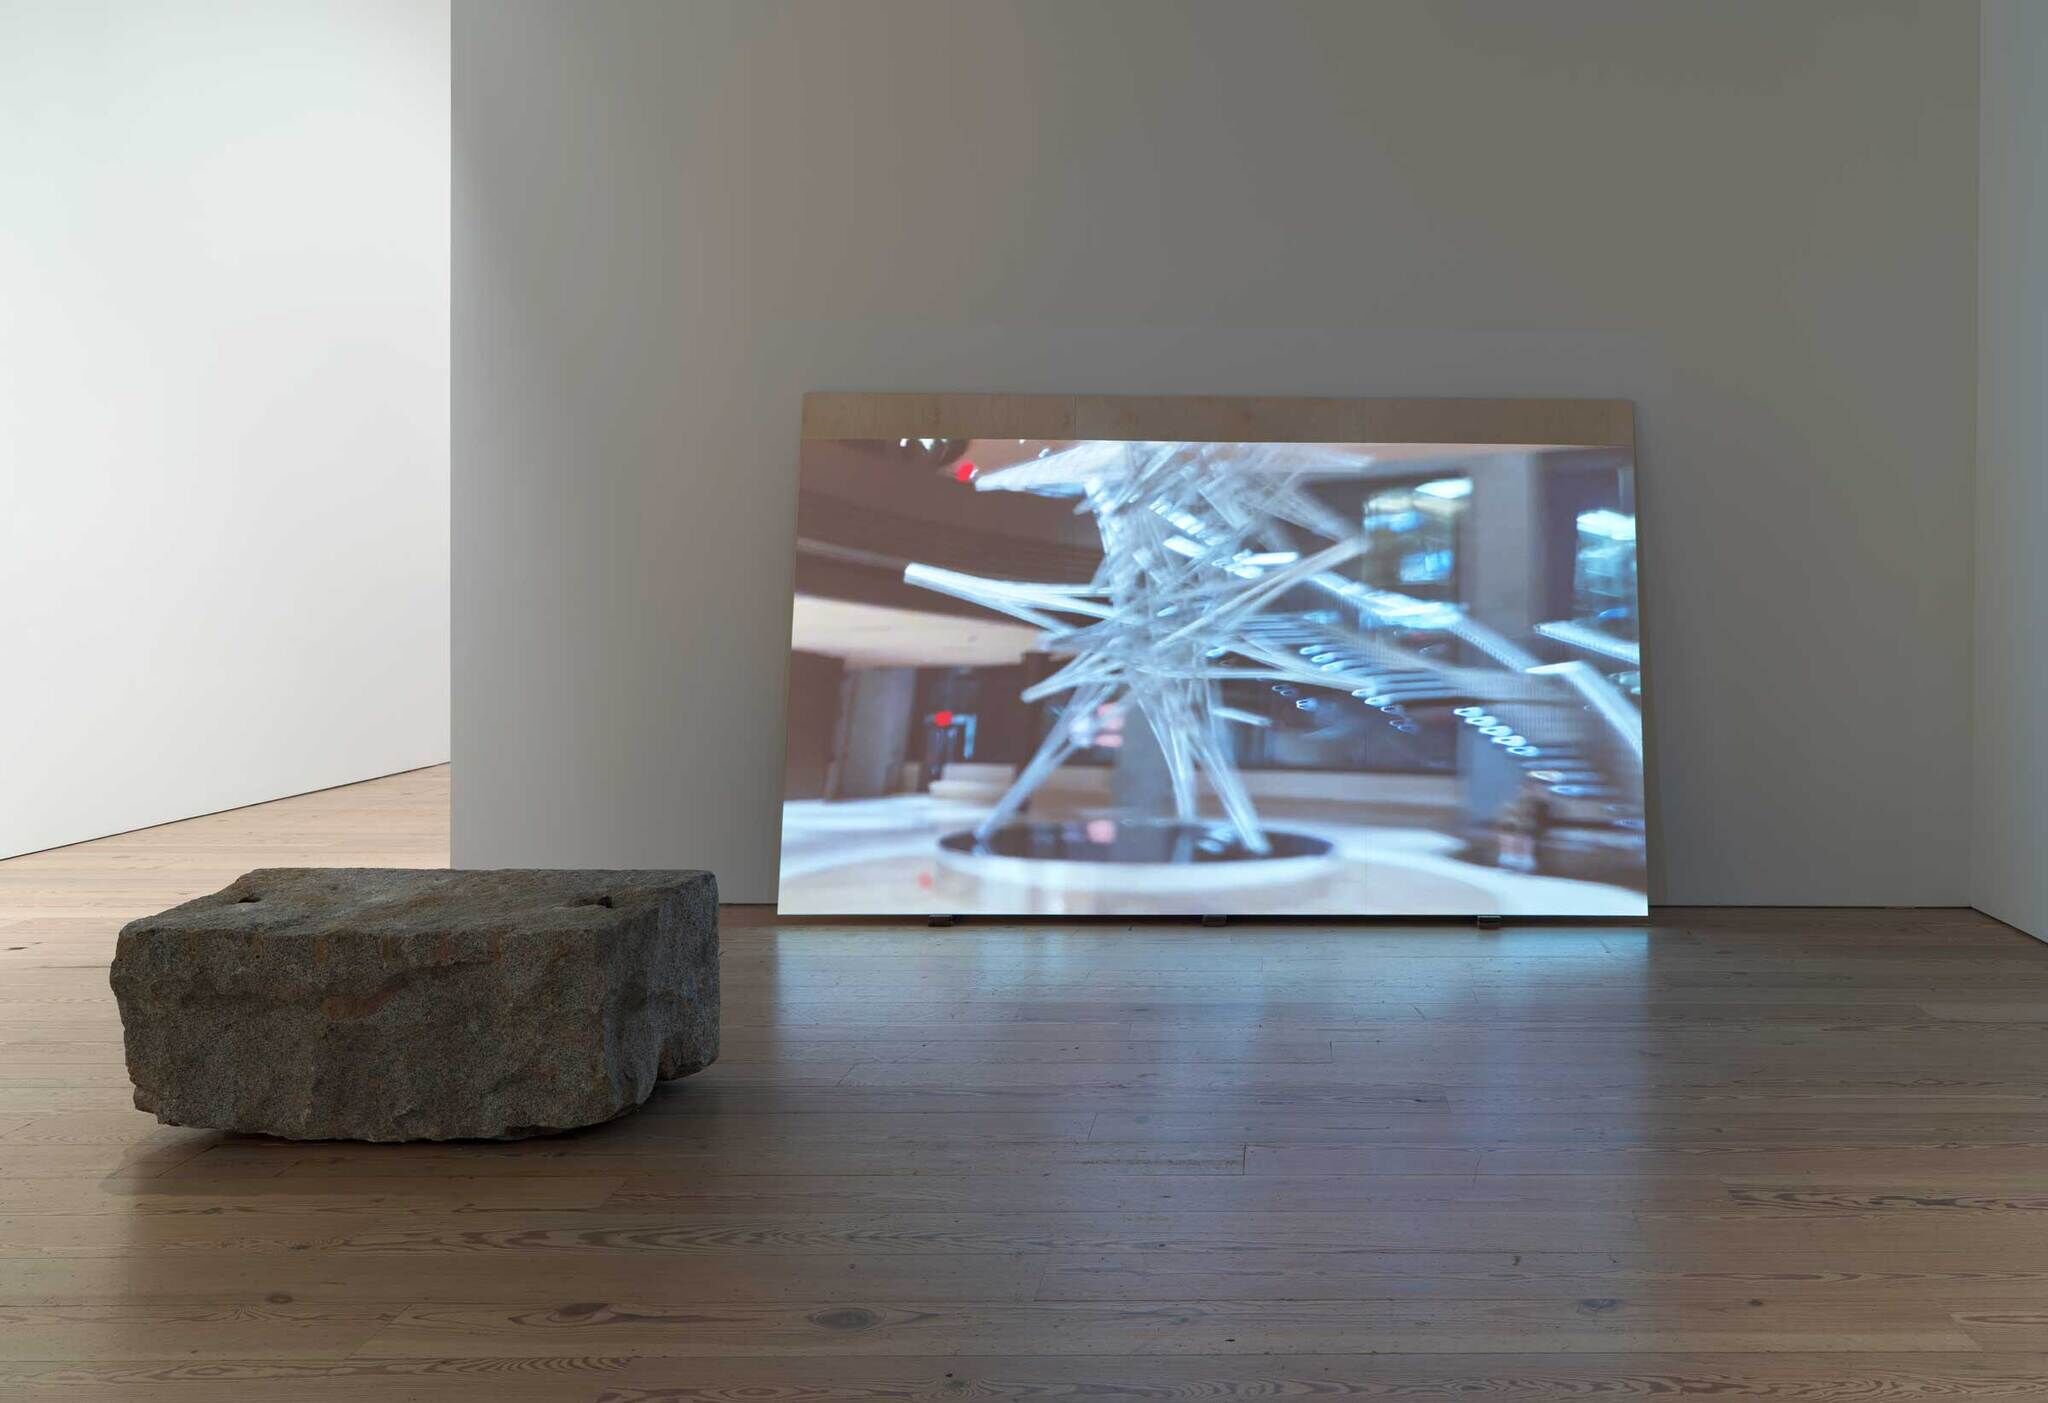 A large stone block on a wooden floor with a blurred photo of a sculpture leaning against a wall in a gallery.